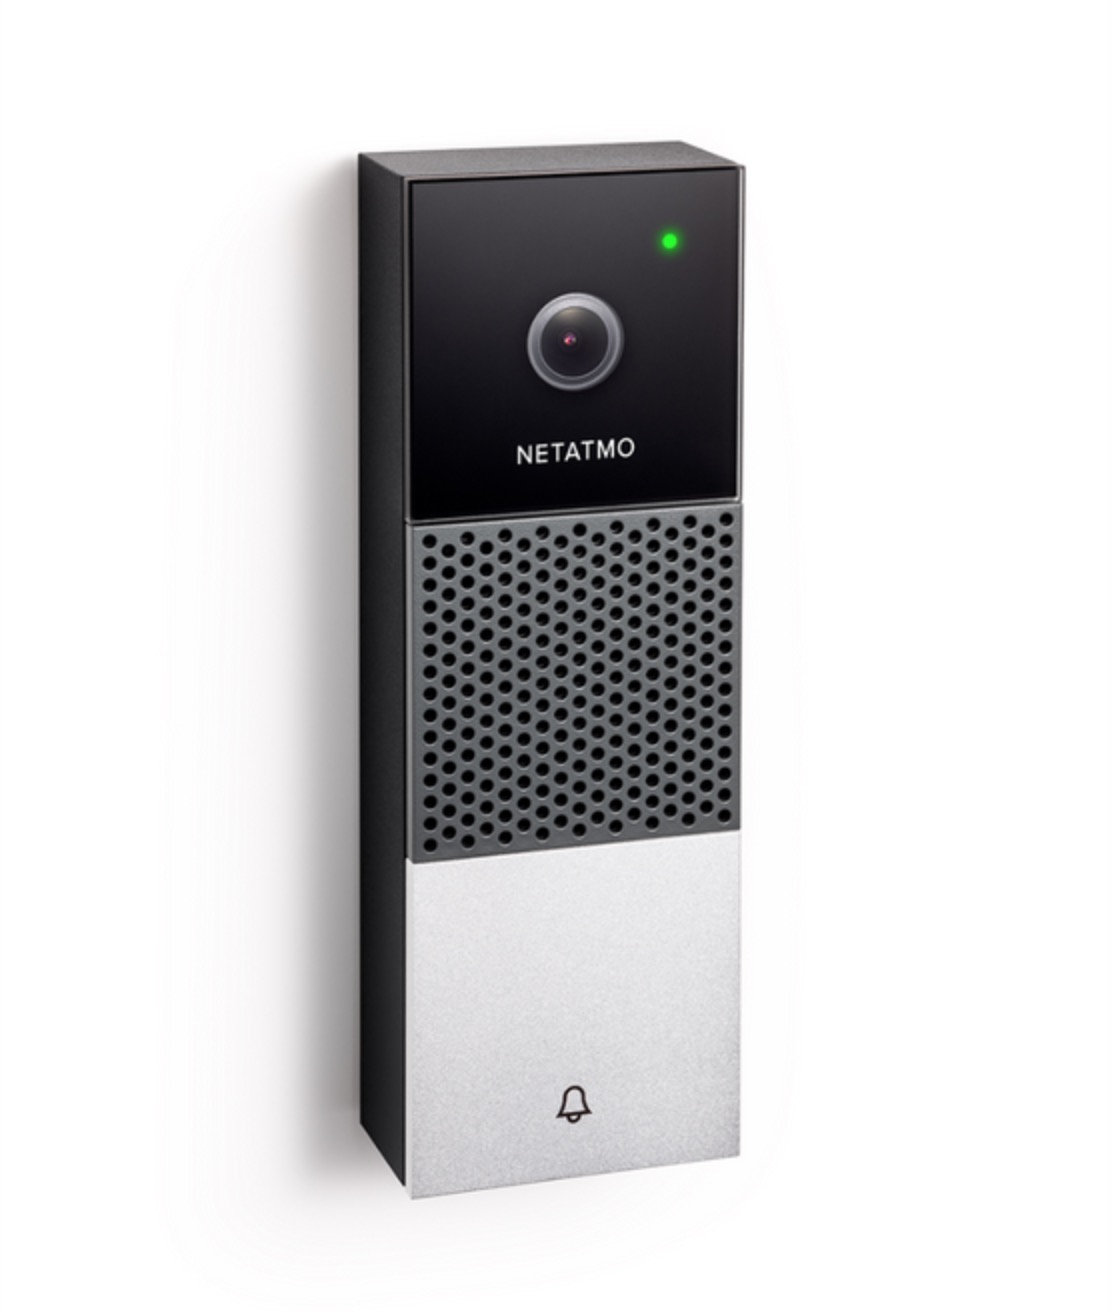 Netatmo Smart Video Doorbell Now Available in the United States and Canada